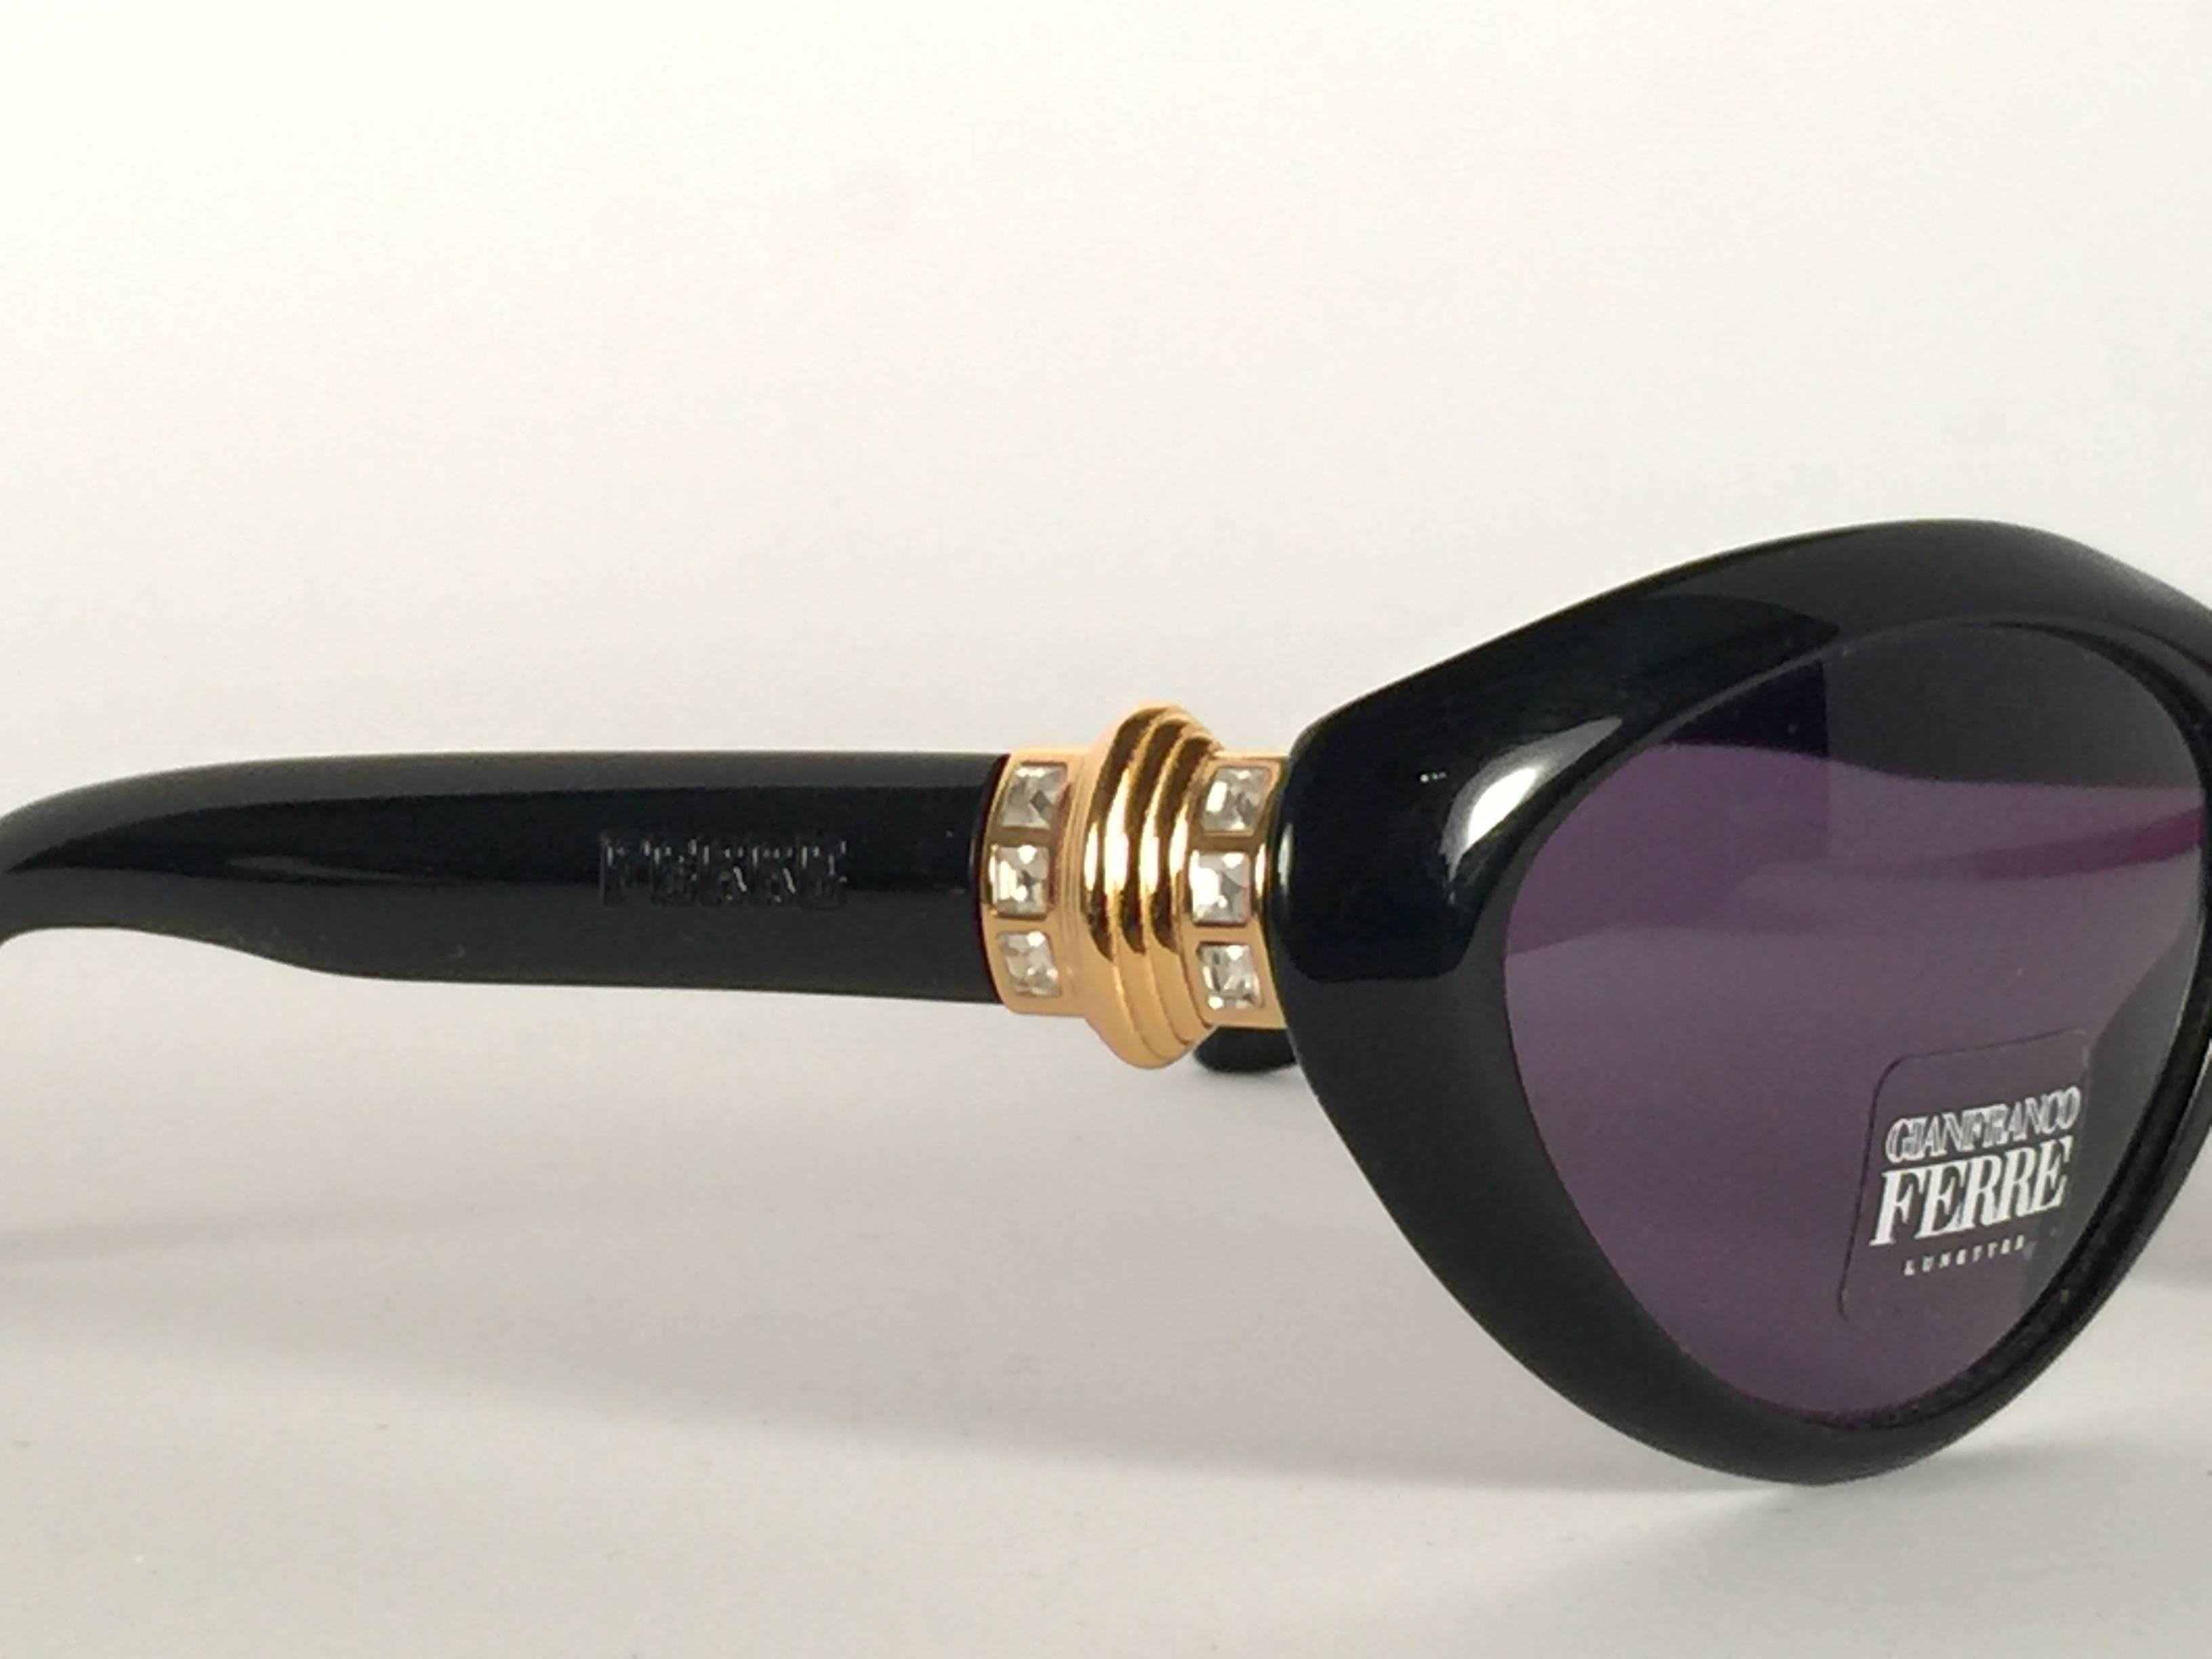 New Vintage Gianfranco Ferré Black & Rhinestones 1990's Made in Italy Sunglasses For Sale 2